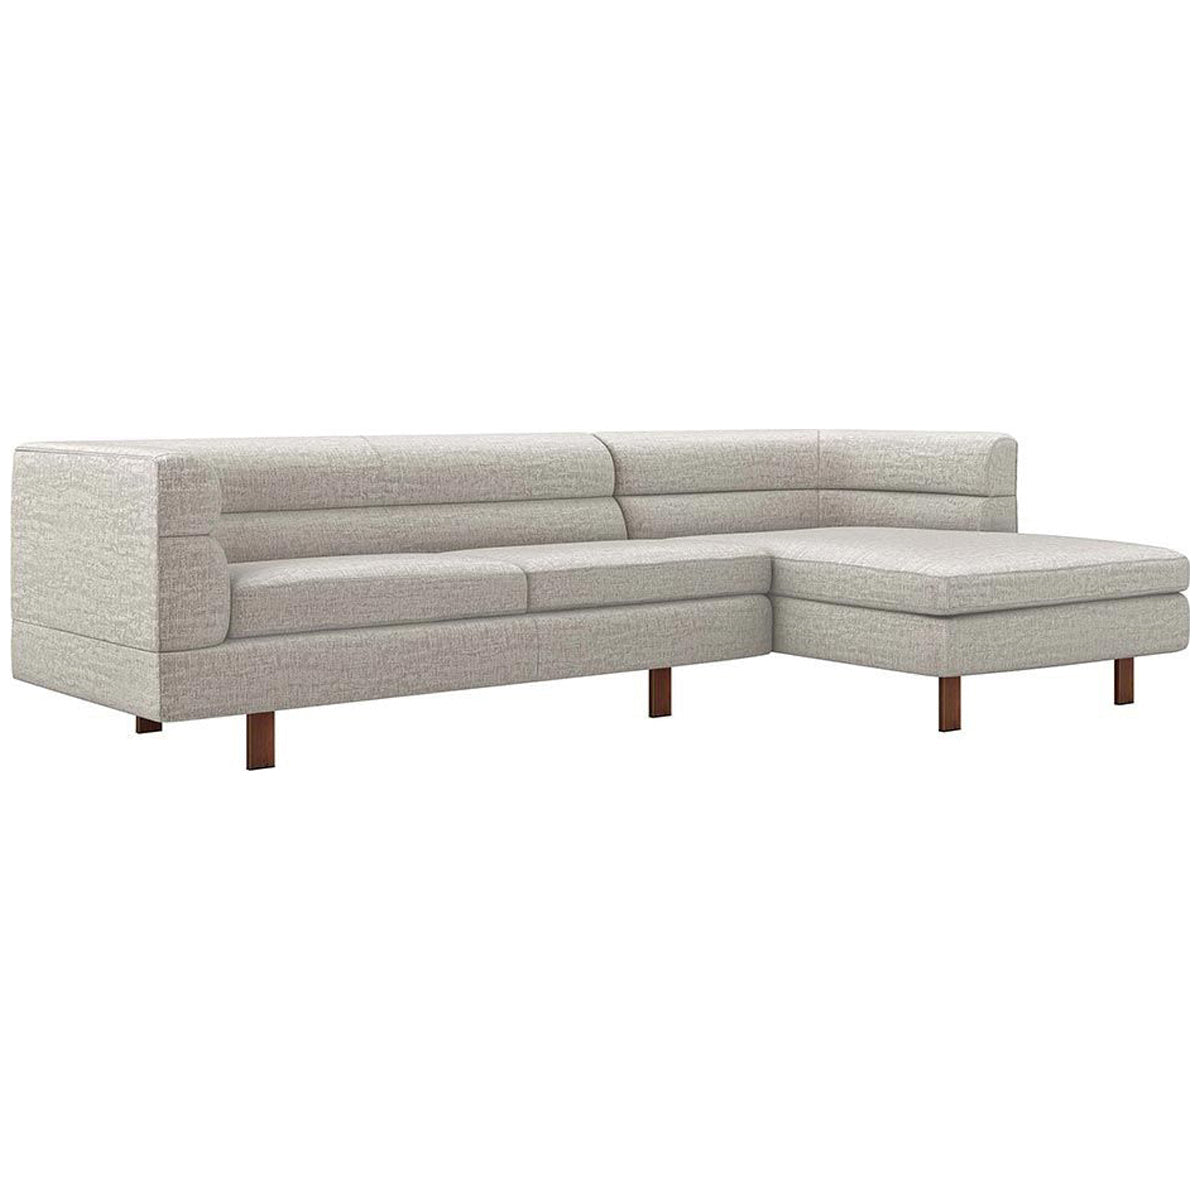 Interlude Home Ornette Chaise 2-Piece Sectional - Storm